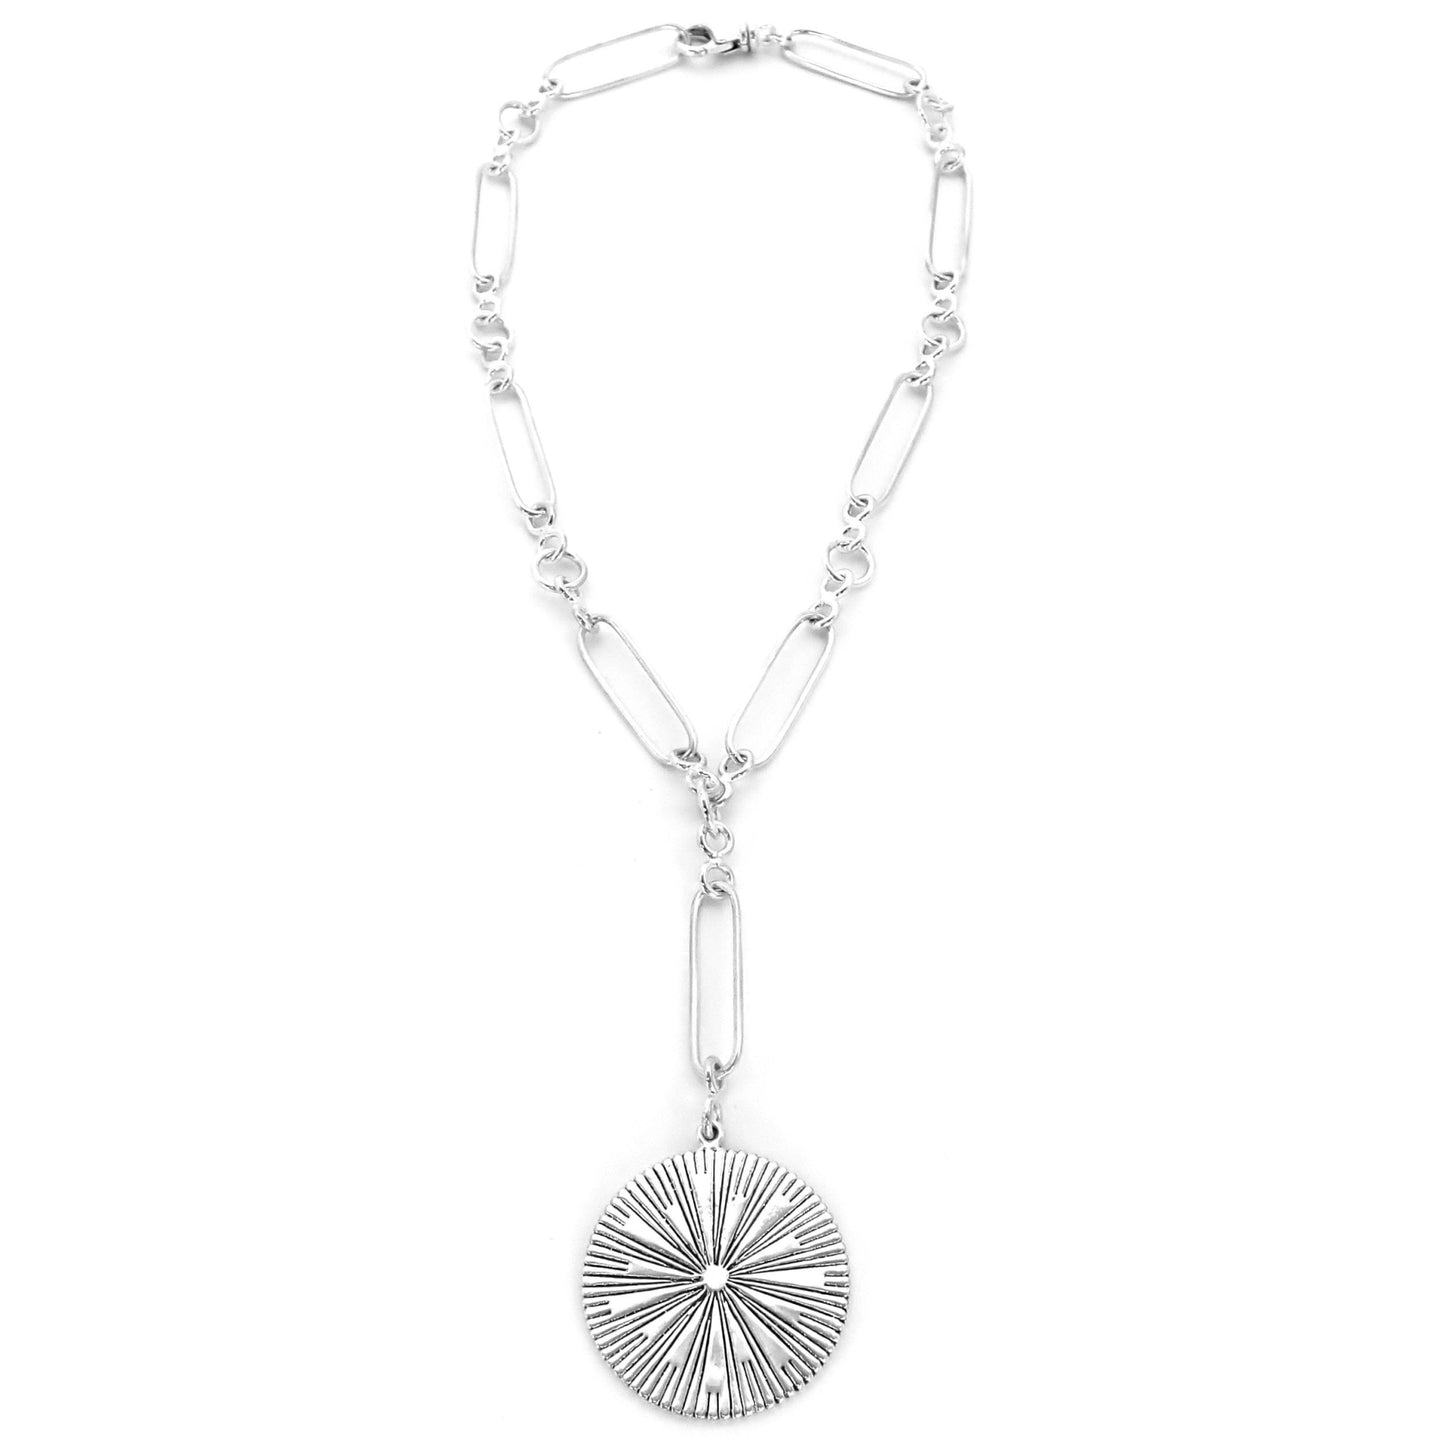 N722 SOLA Sterling Silver Radiant Sun Necklace